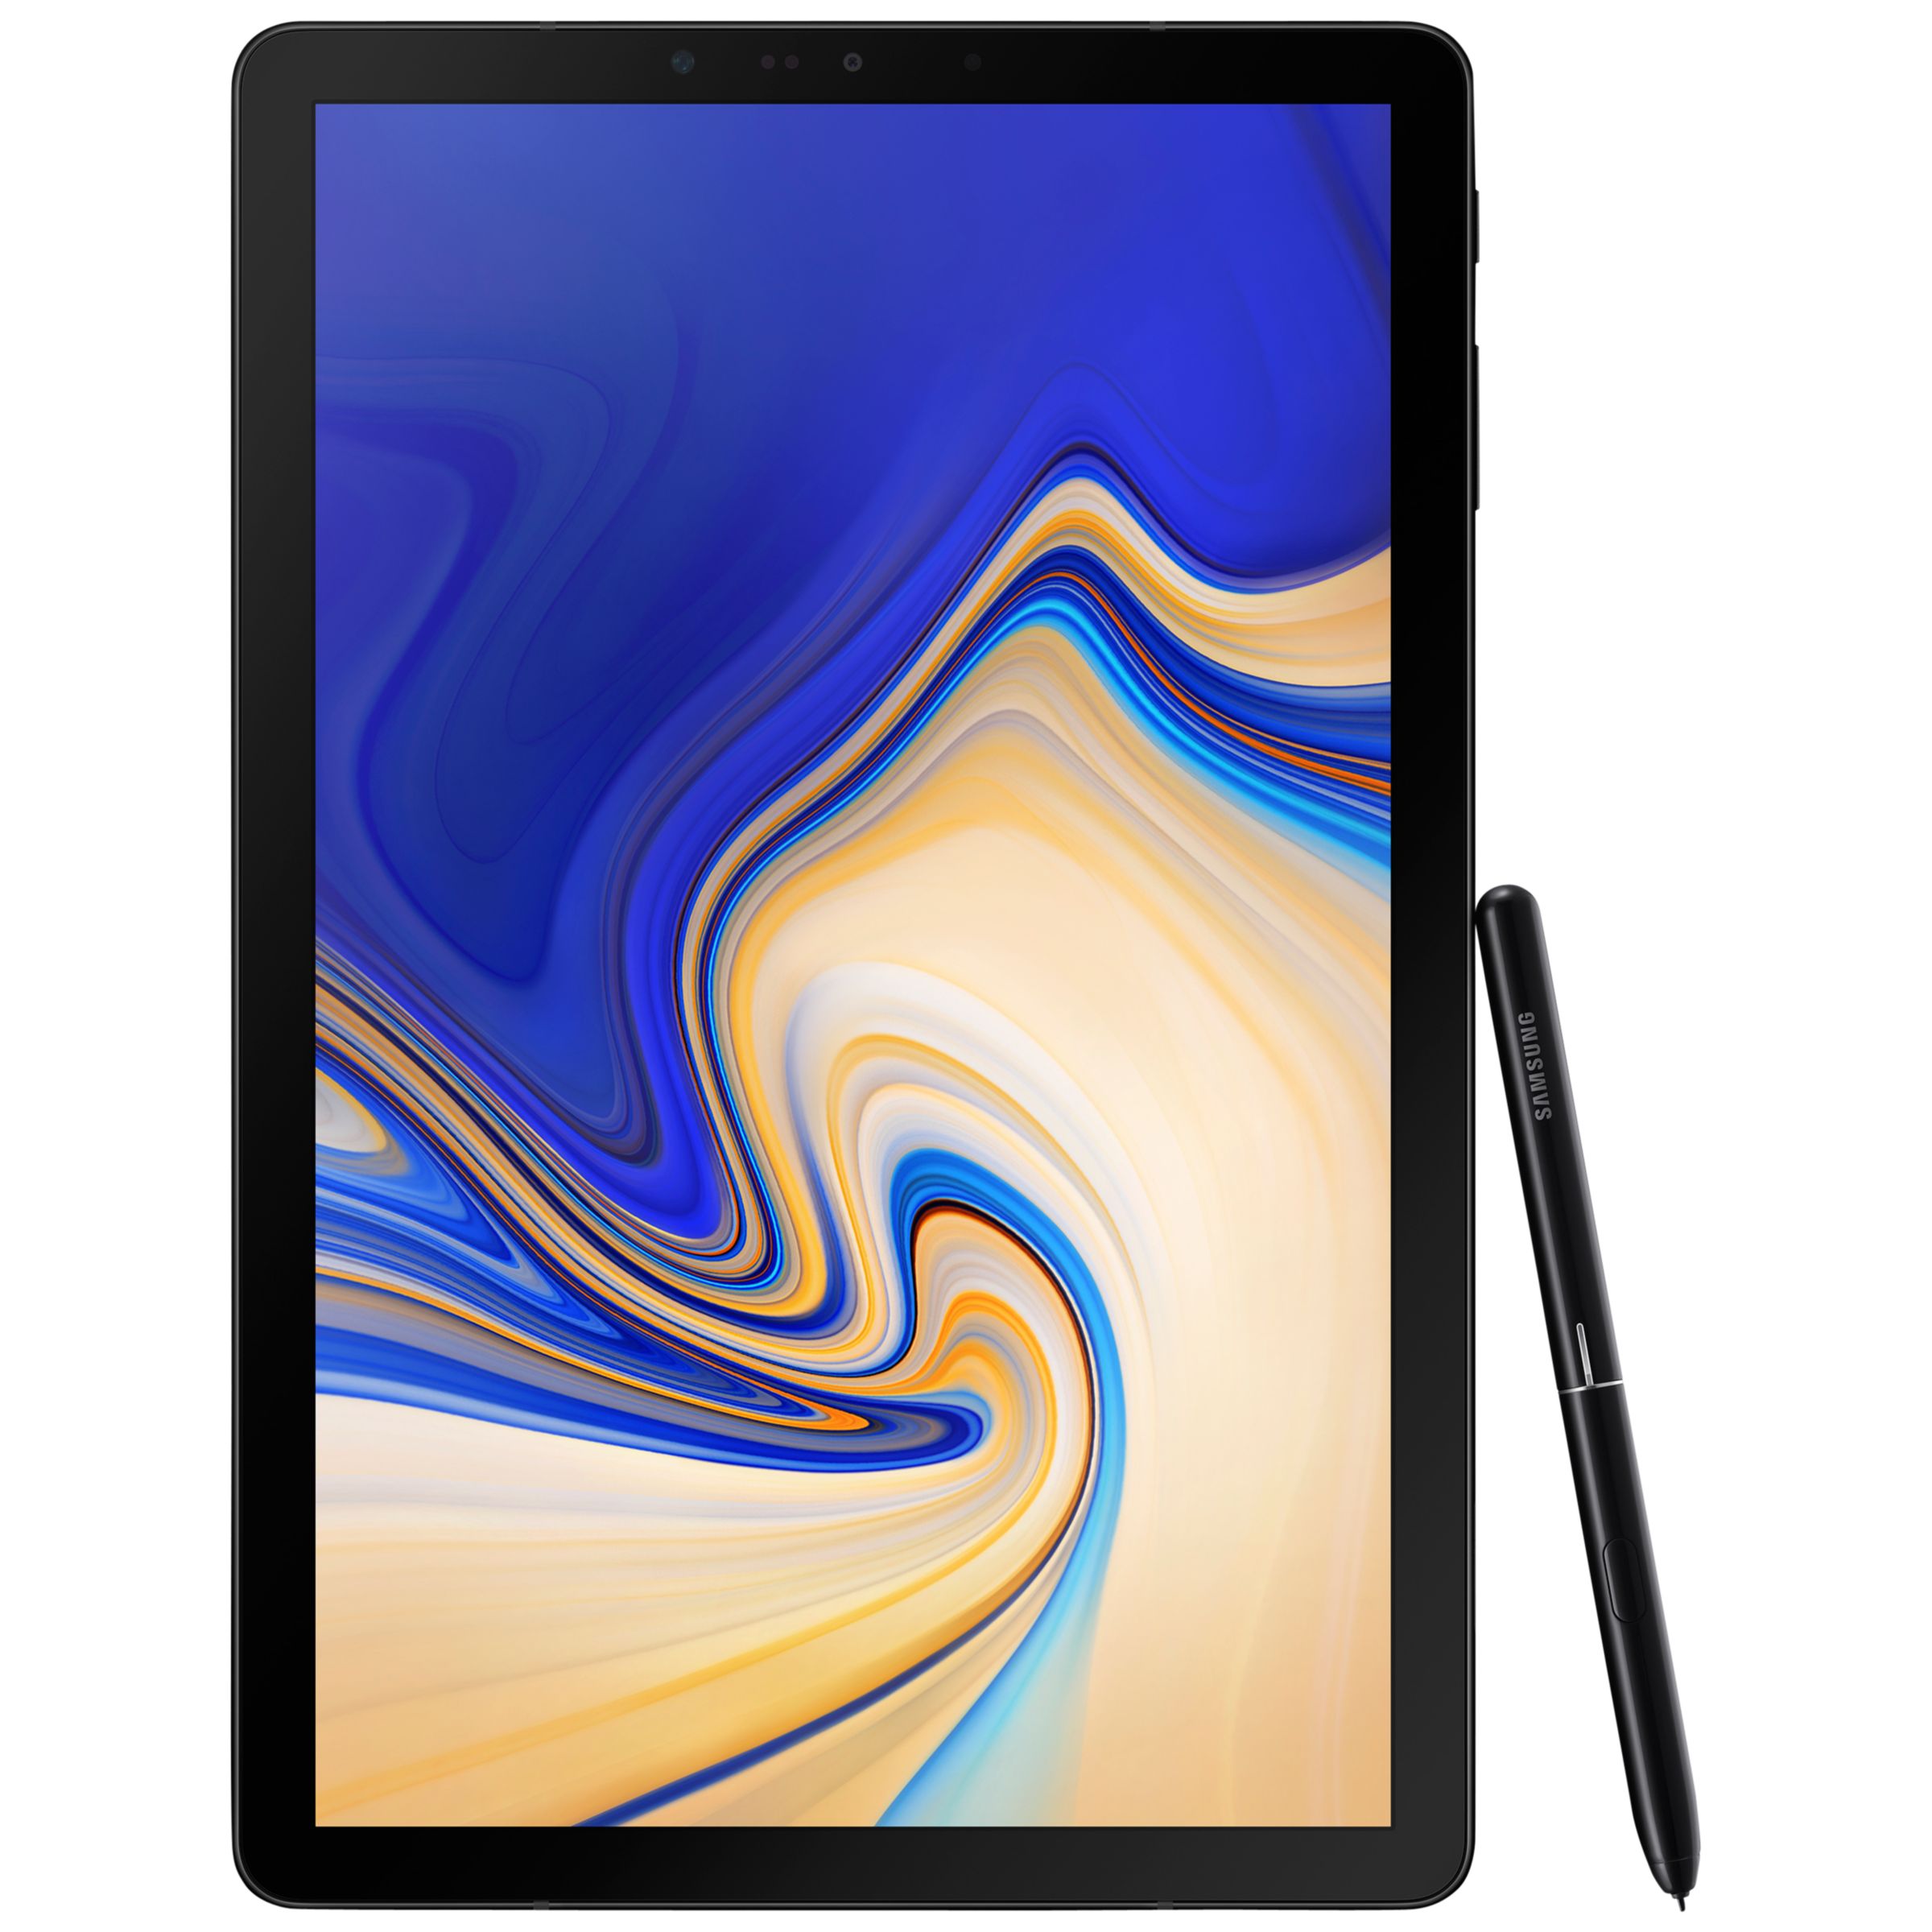 Samsung Galaxy Tab S4 Tablet with S Pen, Android, 64GB, 4GB RAM, Wi-Fi, 10.5"